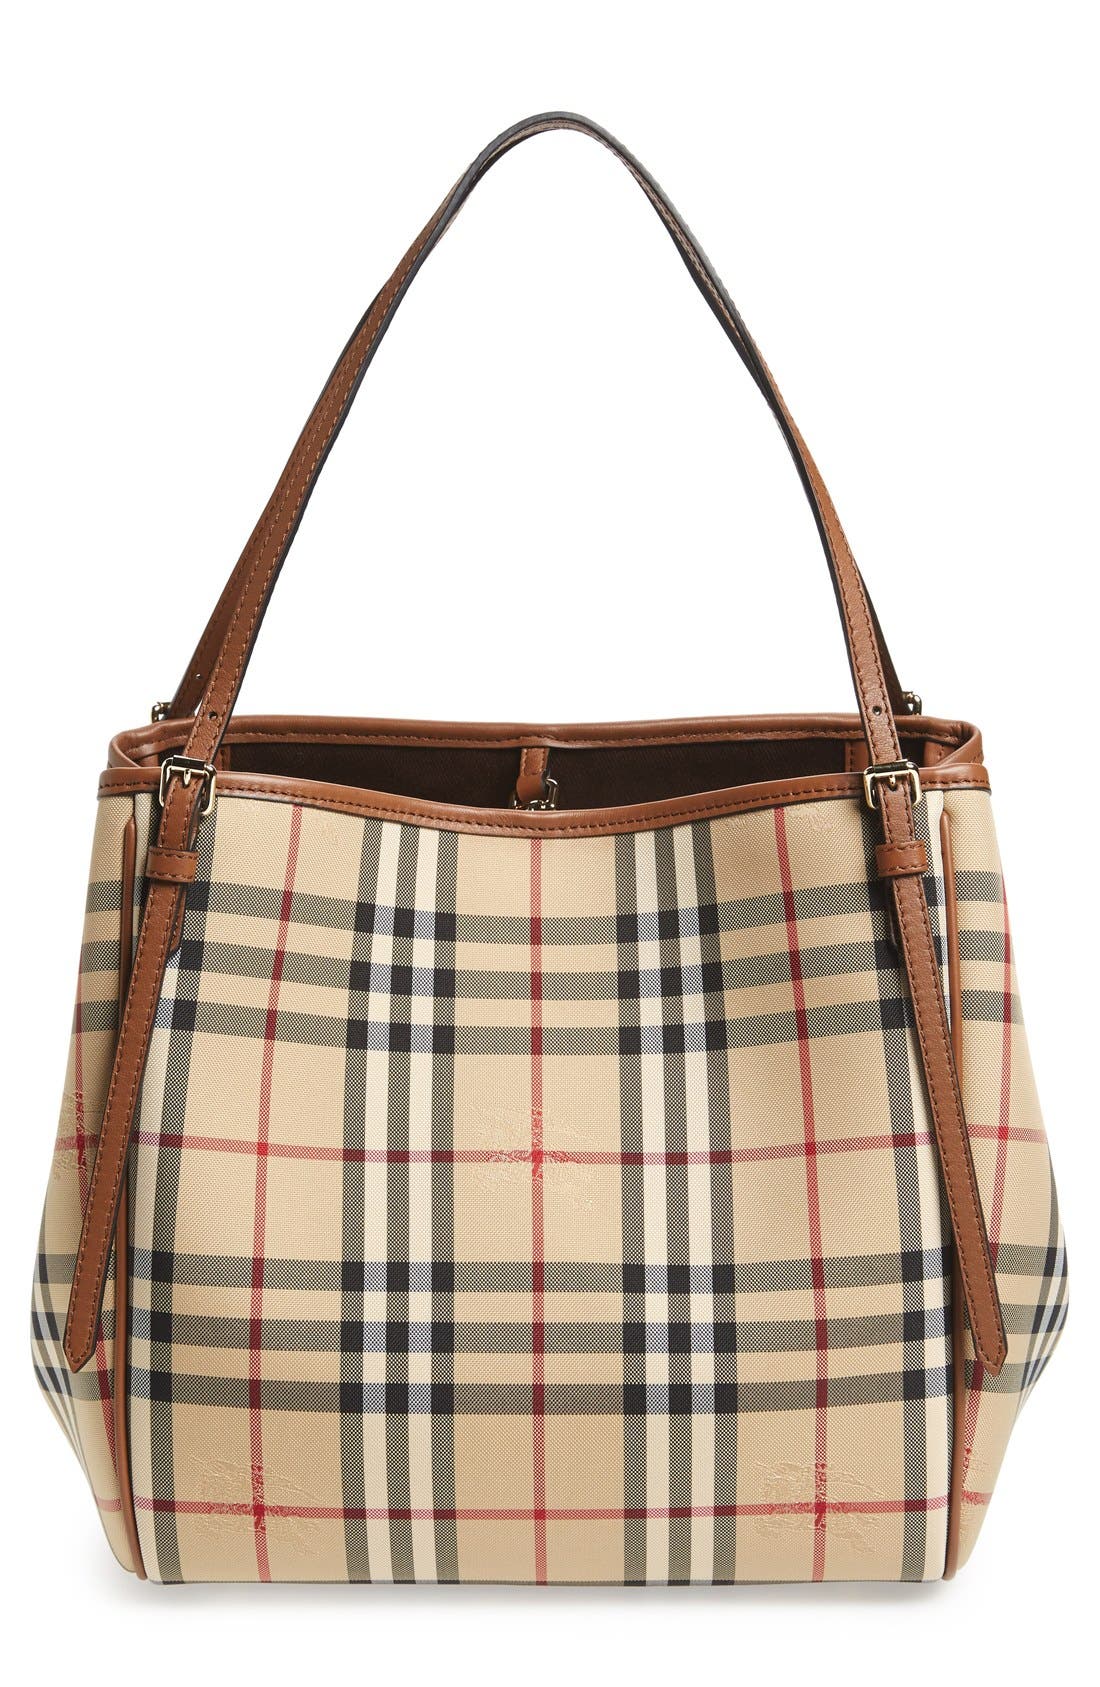 Burberry 'Small Canter' Horseferry 